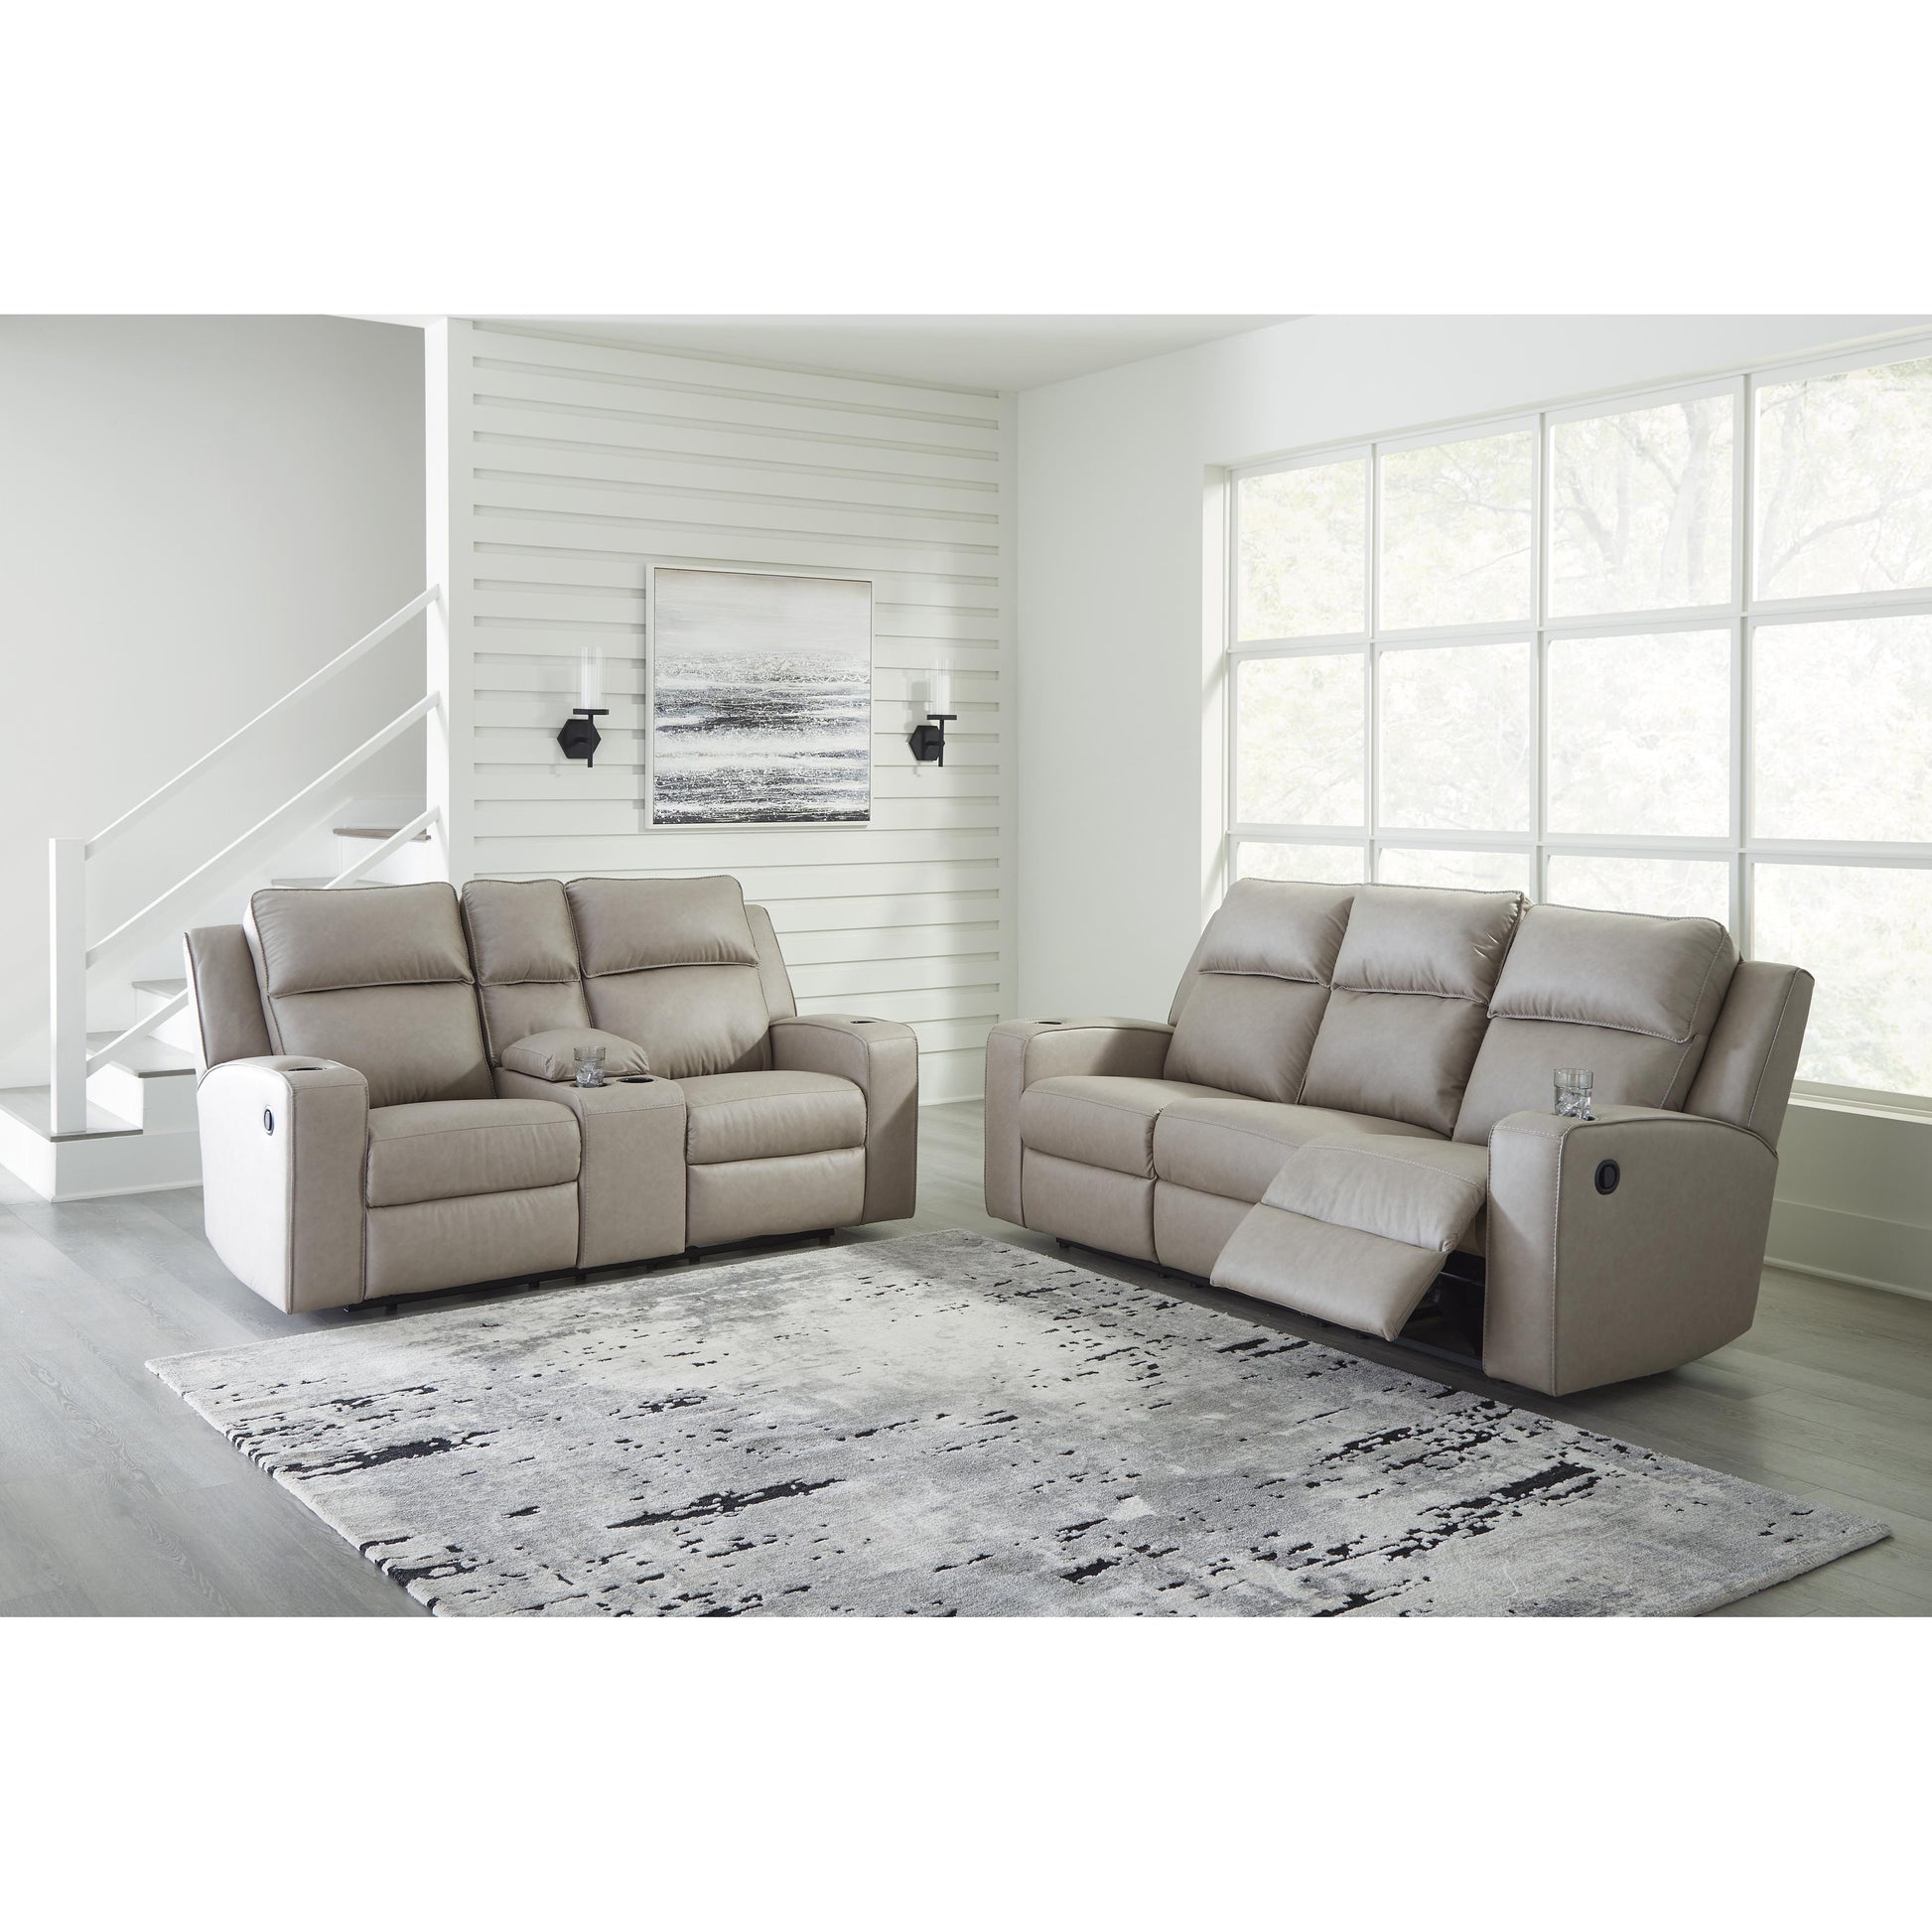 Signature Design by Ashley Lavenhorne Reclining Leather Look Loveseat 6330794 IMAGE 9